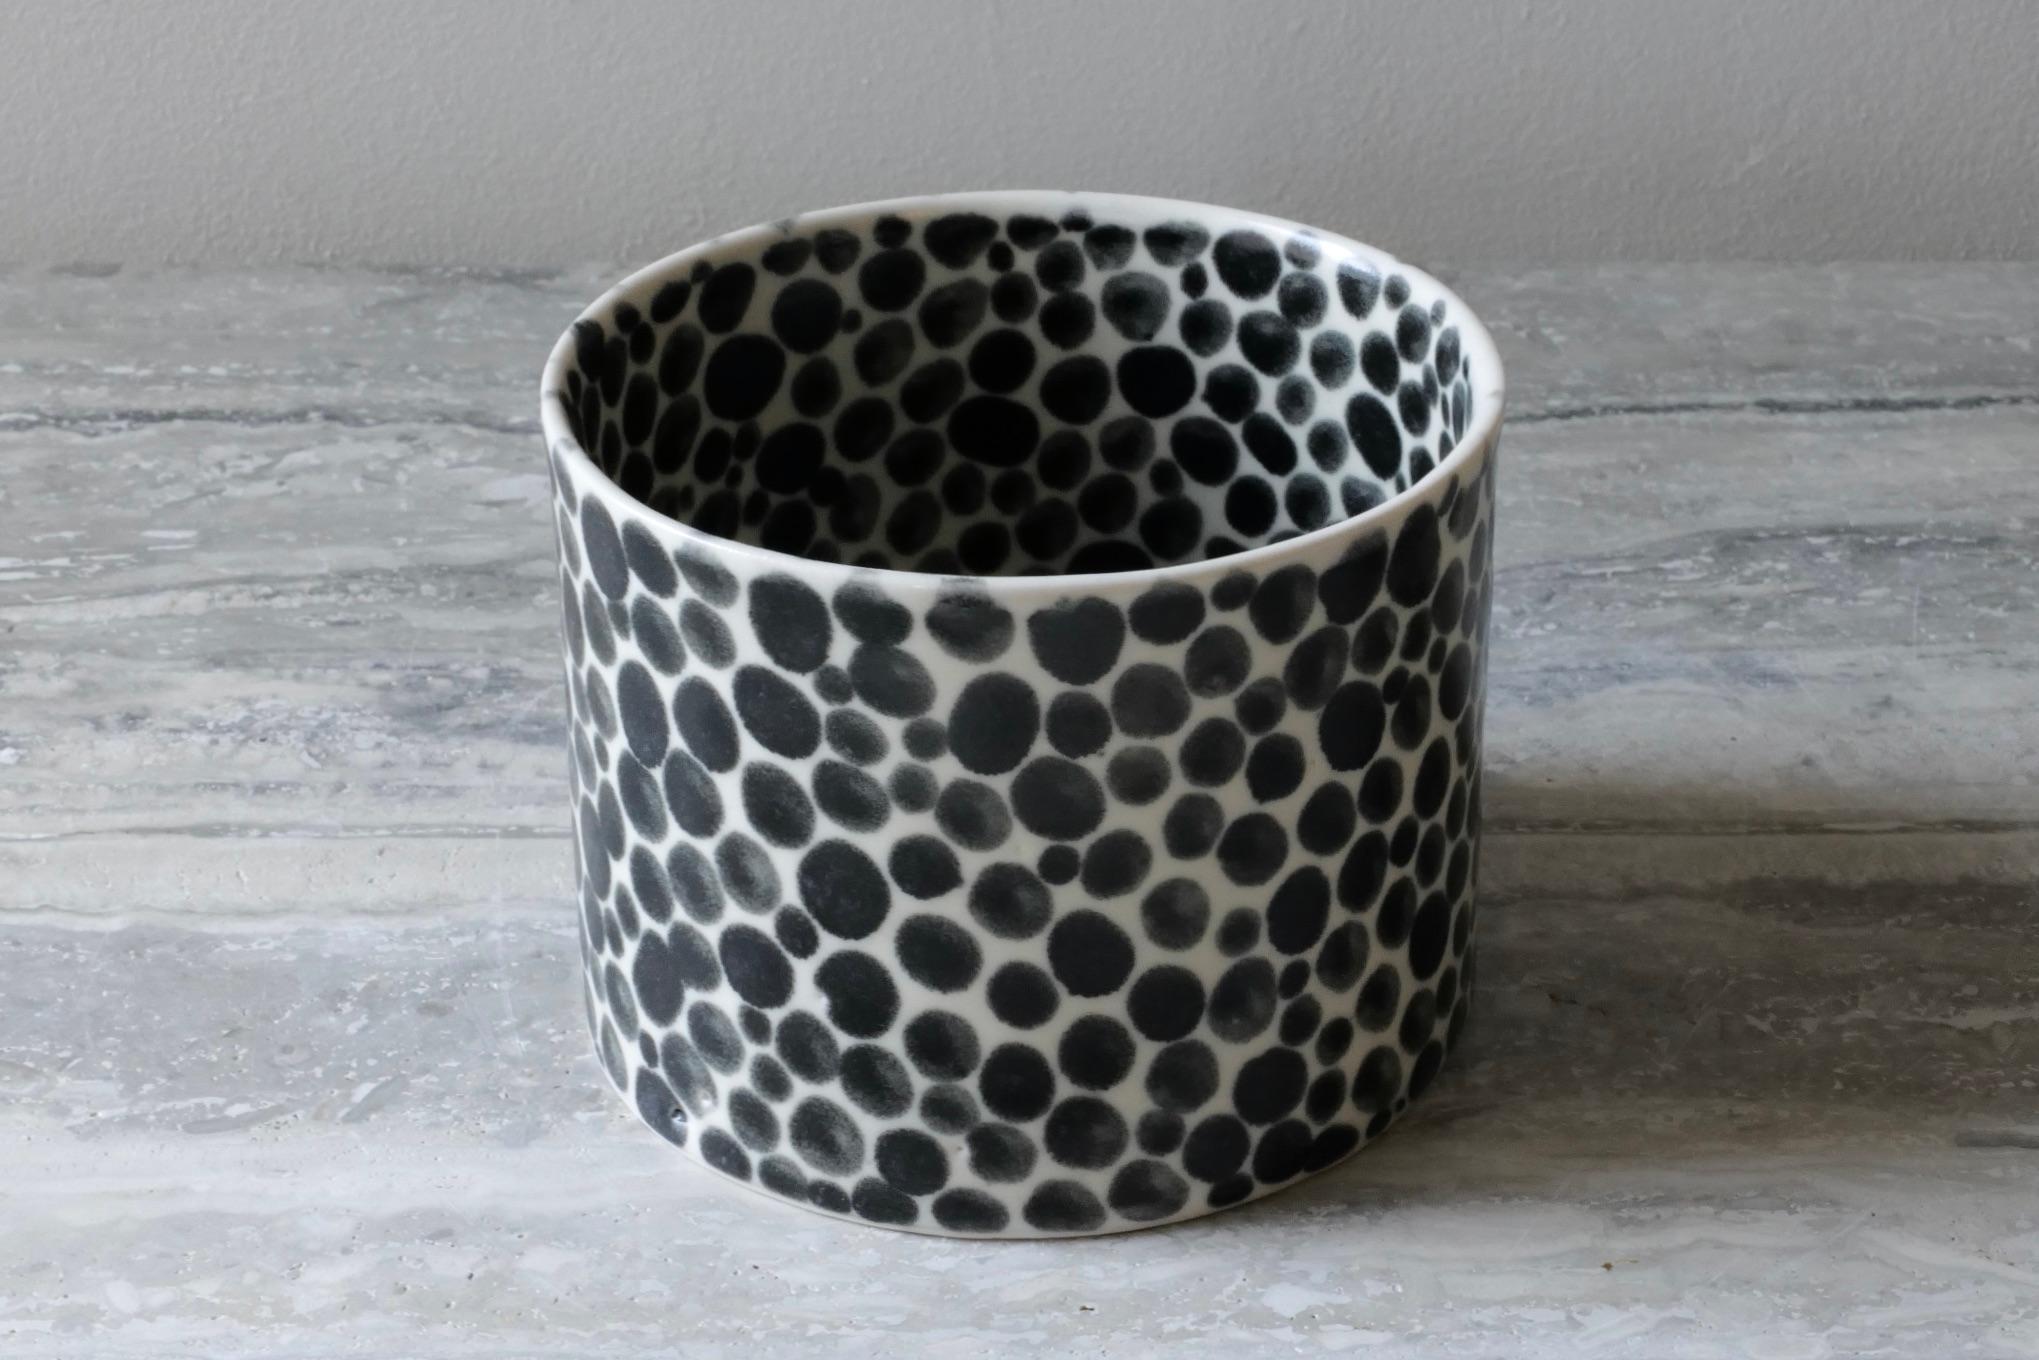 Small, short ceramic vase. Hand-cast in porcelain and once bisque fired, each dot is hand-painted with a shiny black glaze. An unconventional layered glazing technique, developed by the artist, is used in these cast porcelain pieces. The straight